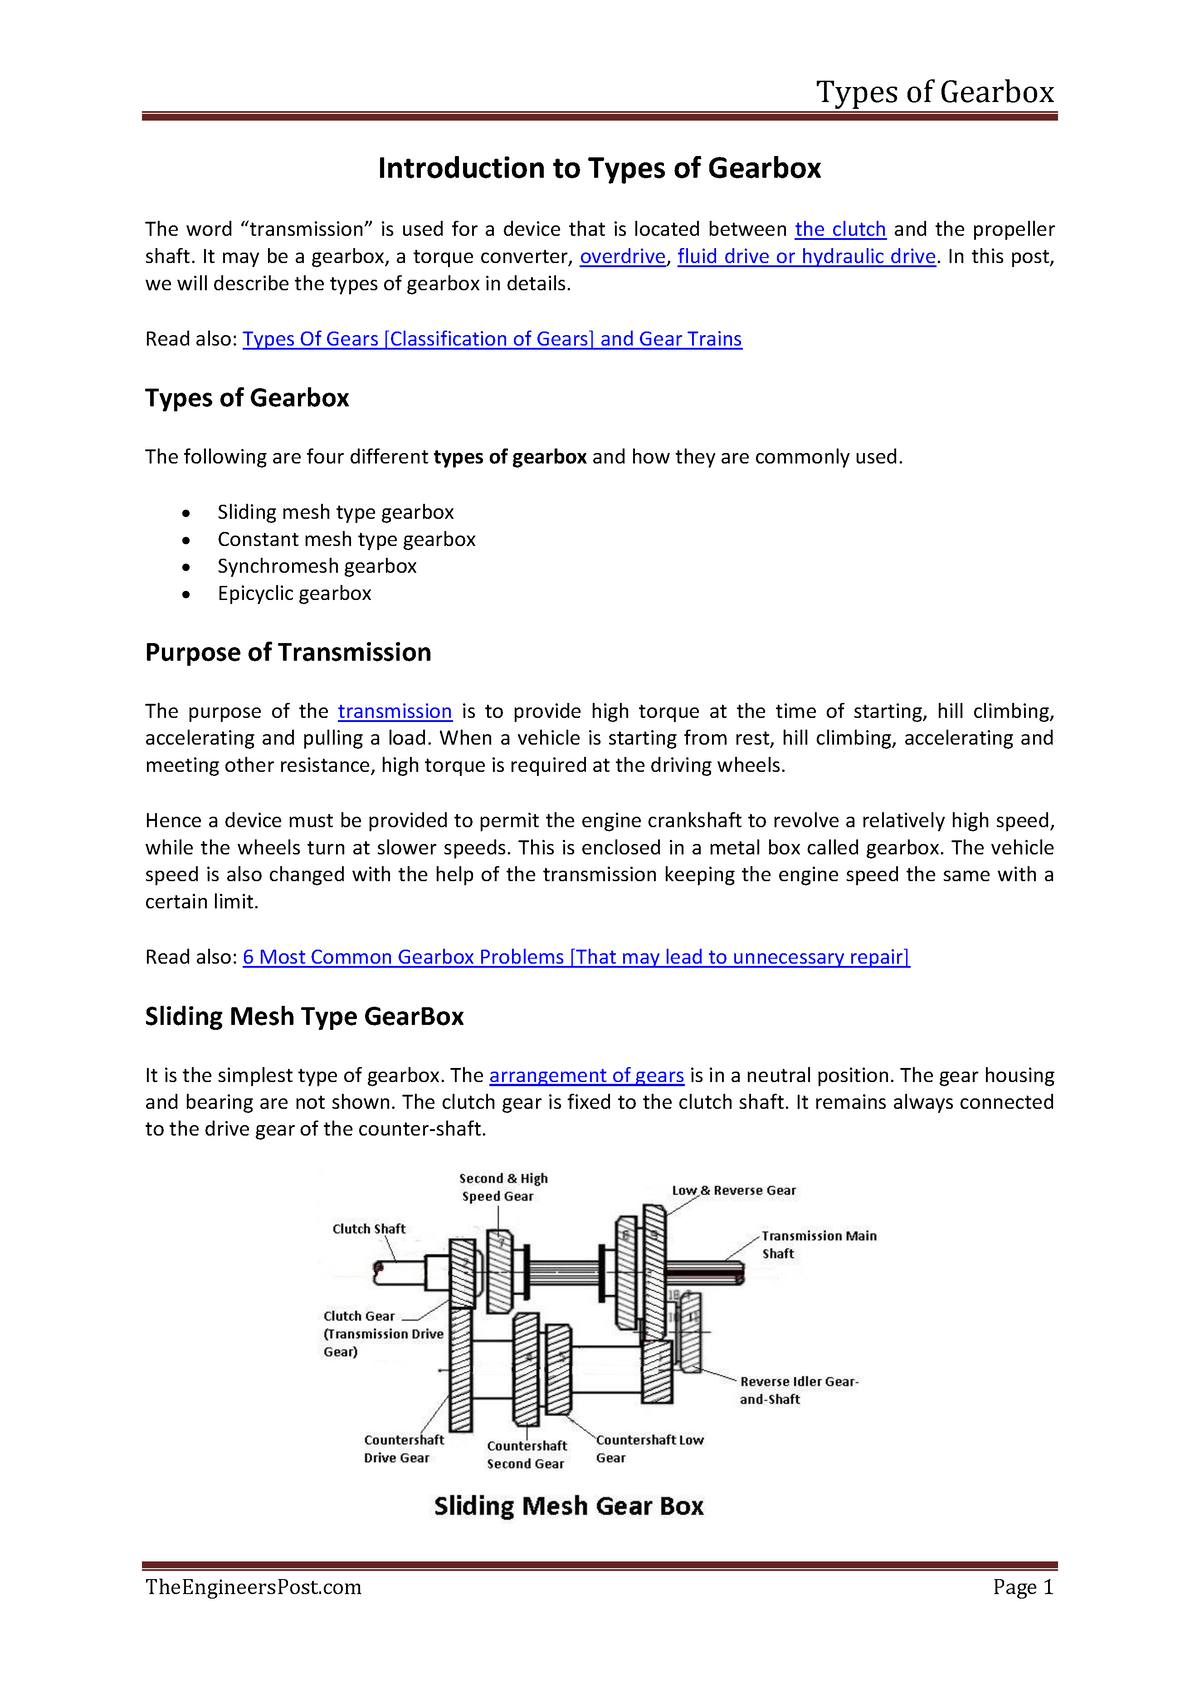 Types of Gearbox - V tech notes - Introduction to Types of Gearbox